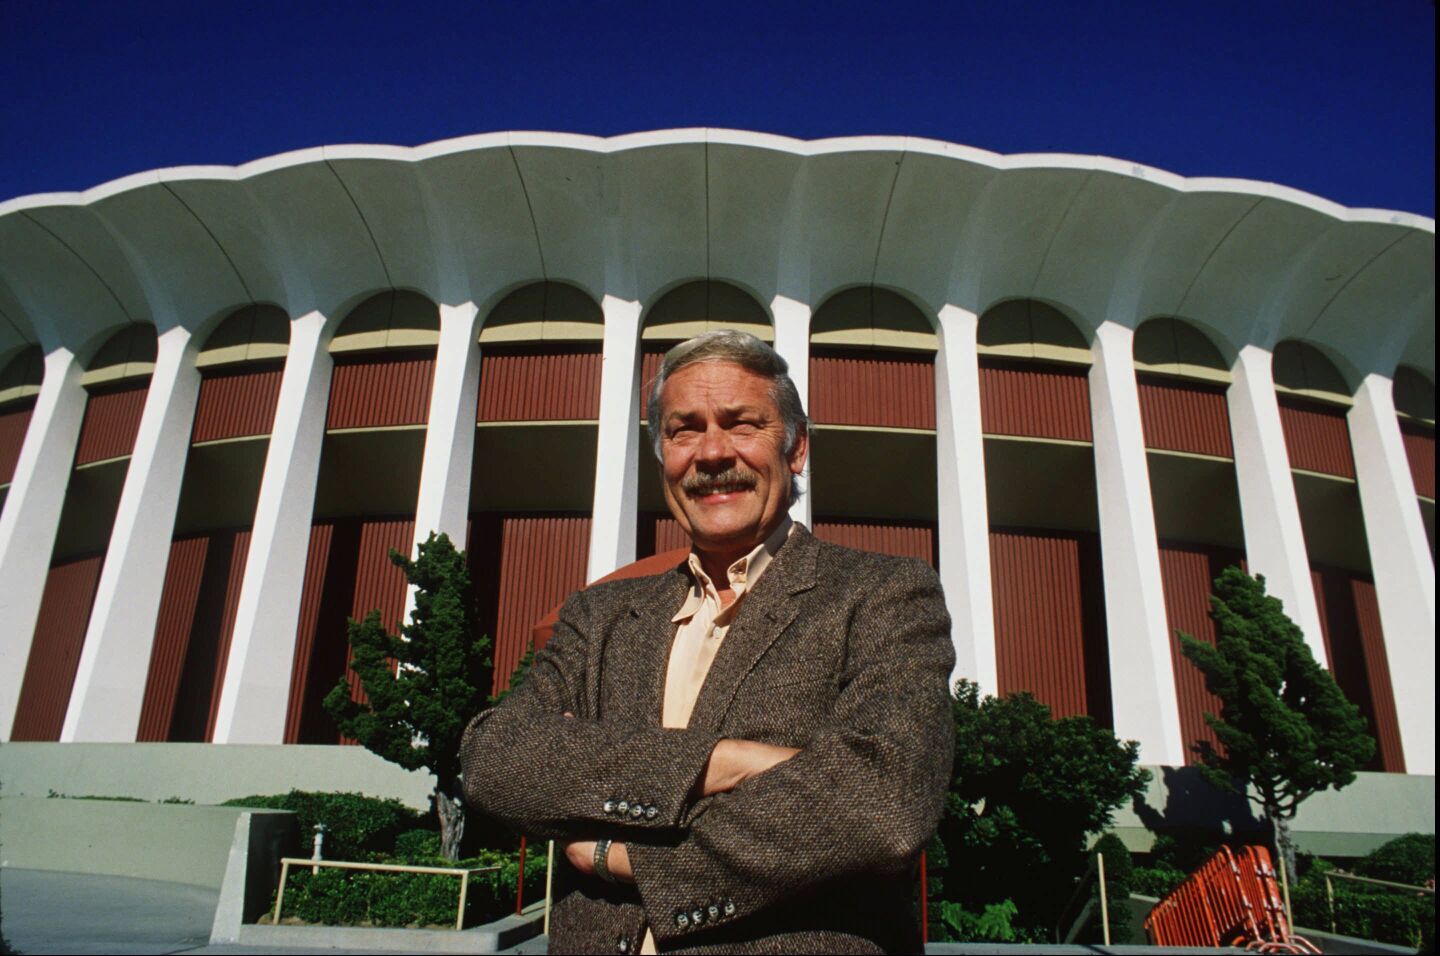 Jerry Buss at the Forum